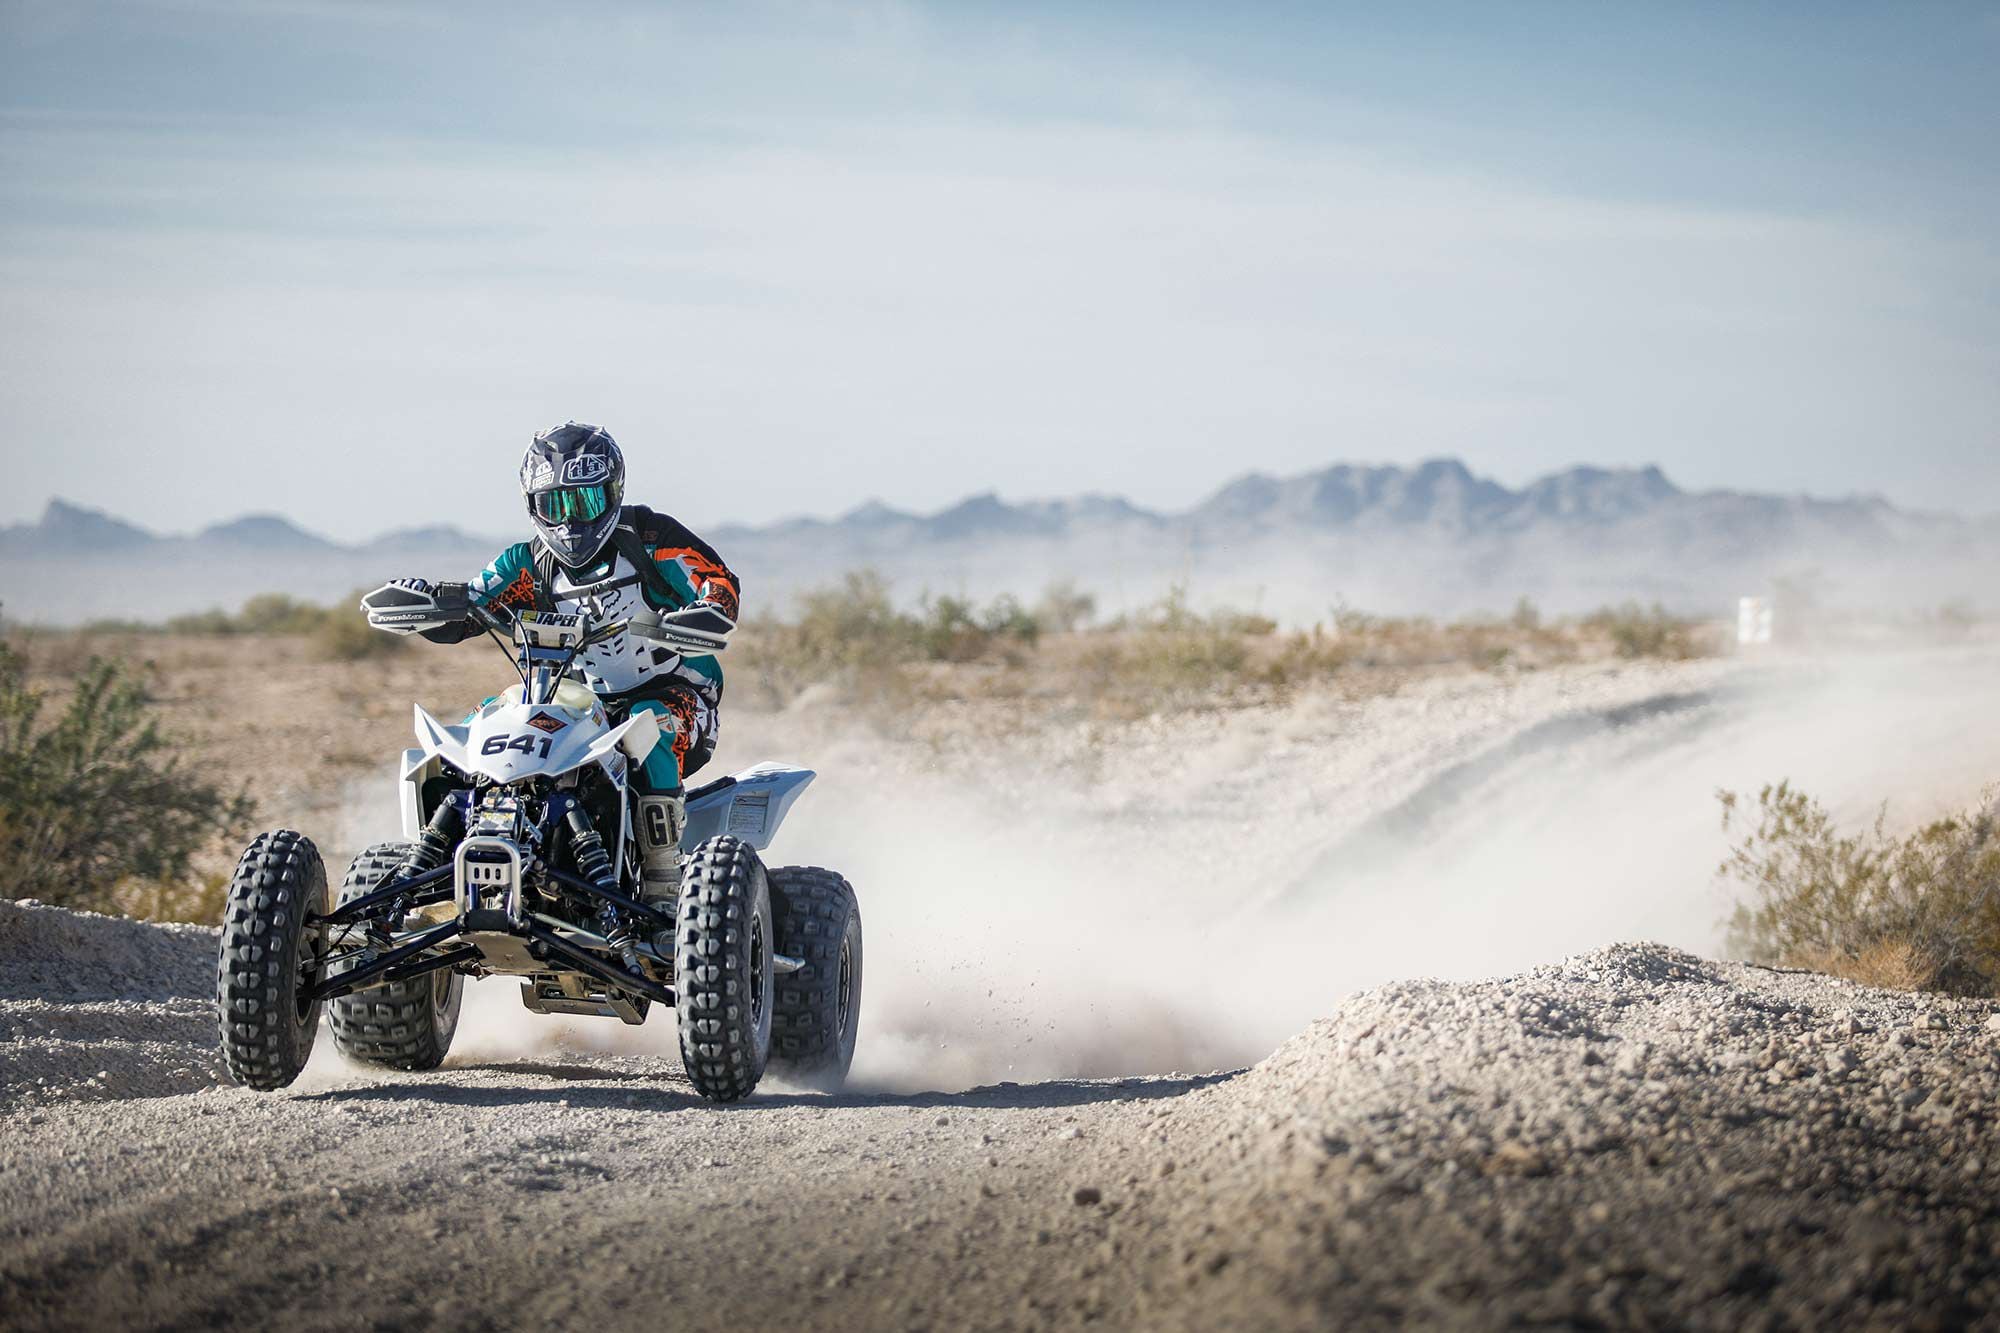 Kyle Ferry pilots his No. 641 Suzuki QuadSport LT-R450 to second place in the Expert Ironman class.